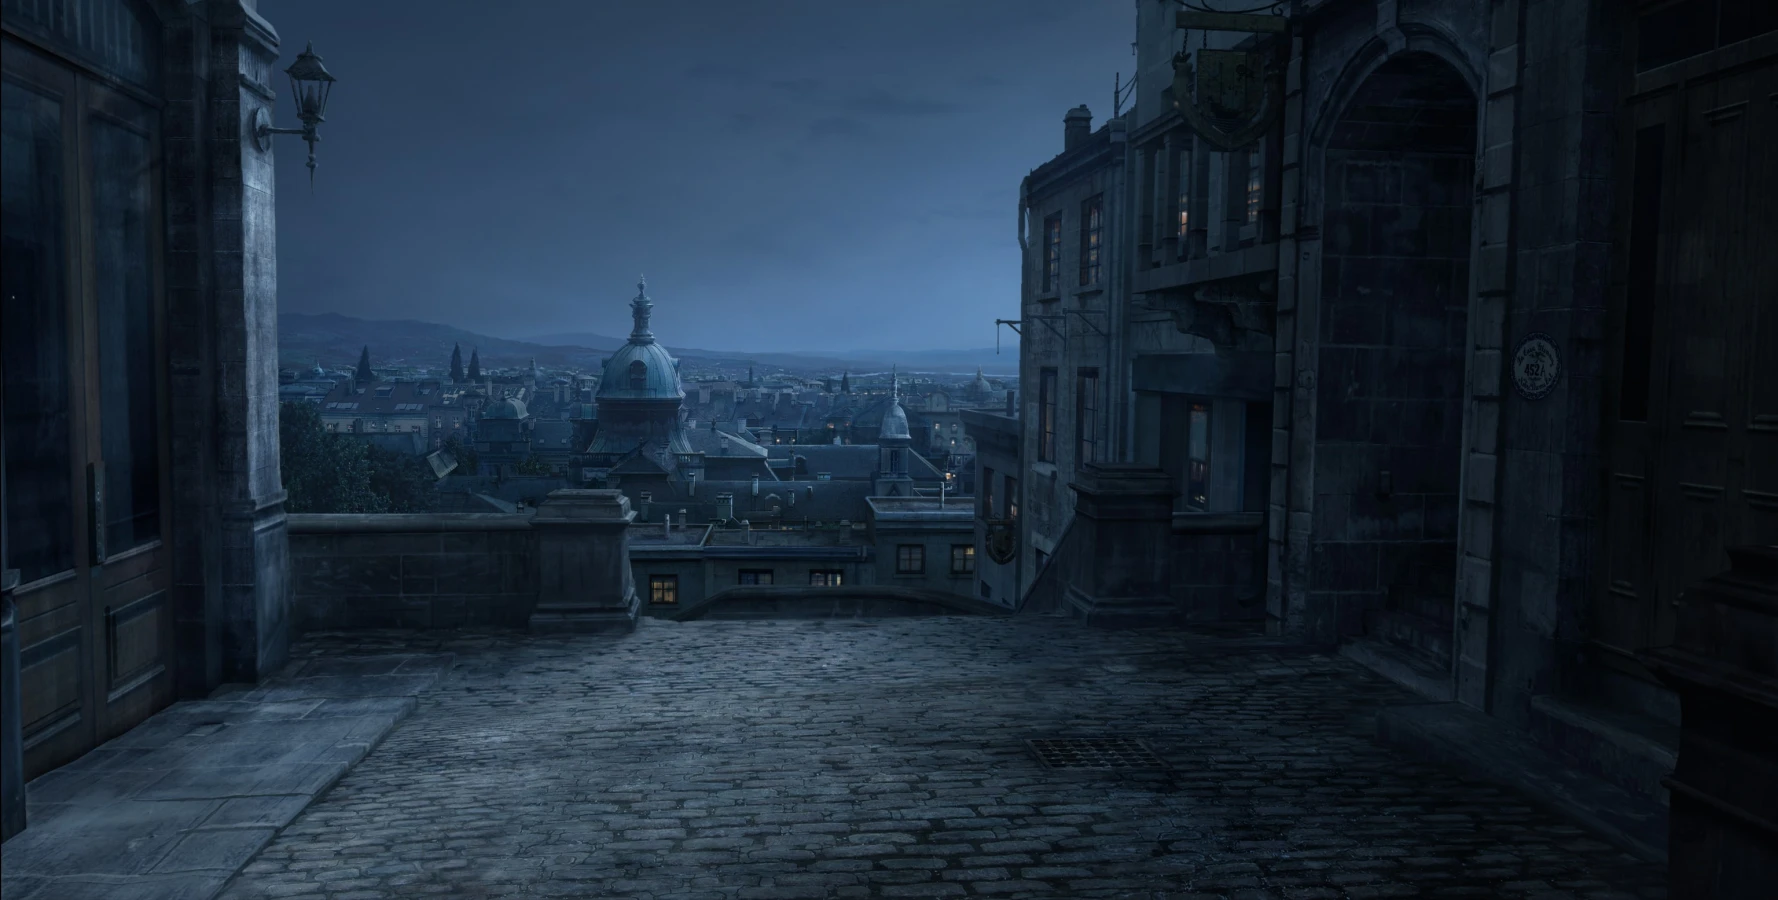  Mathieu Raynault's work old city view by night Raynault vfx 